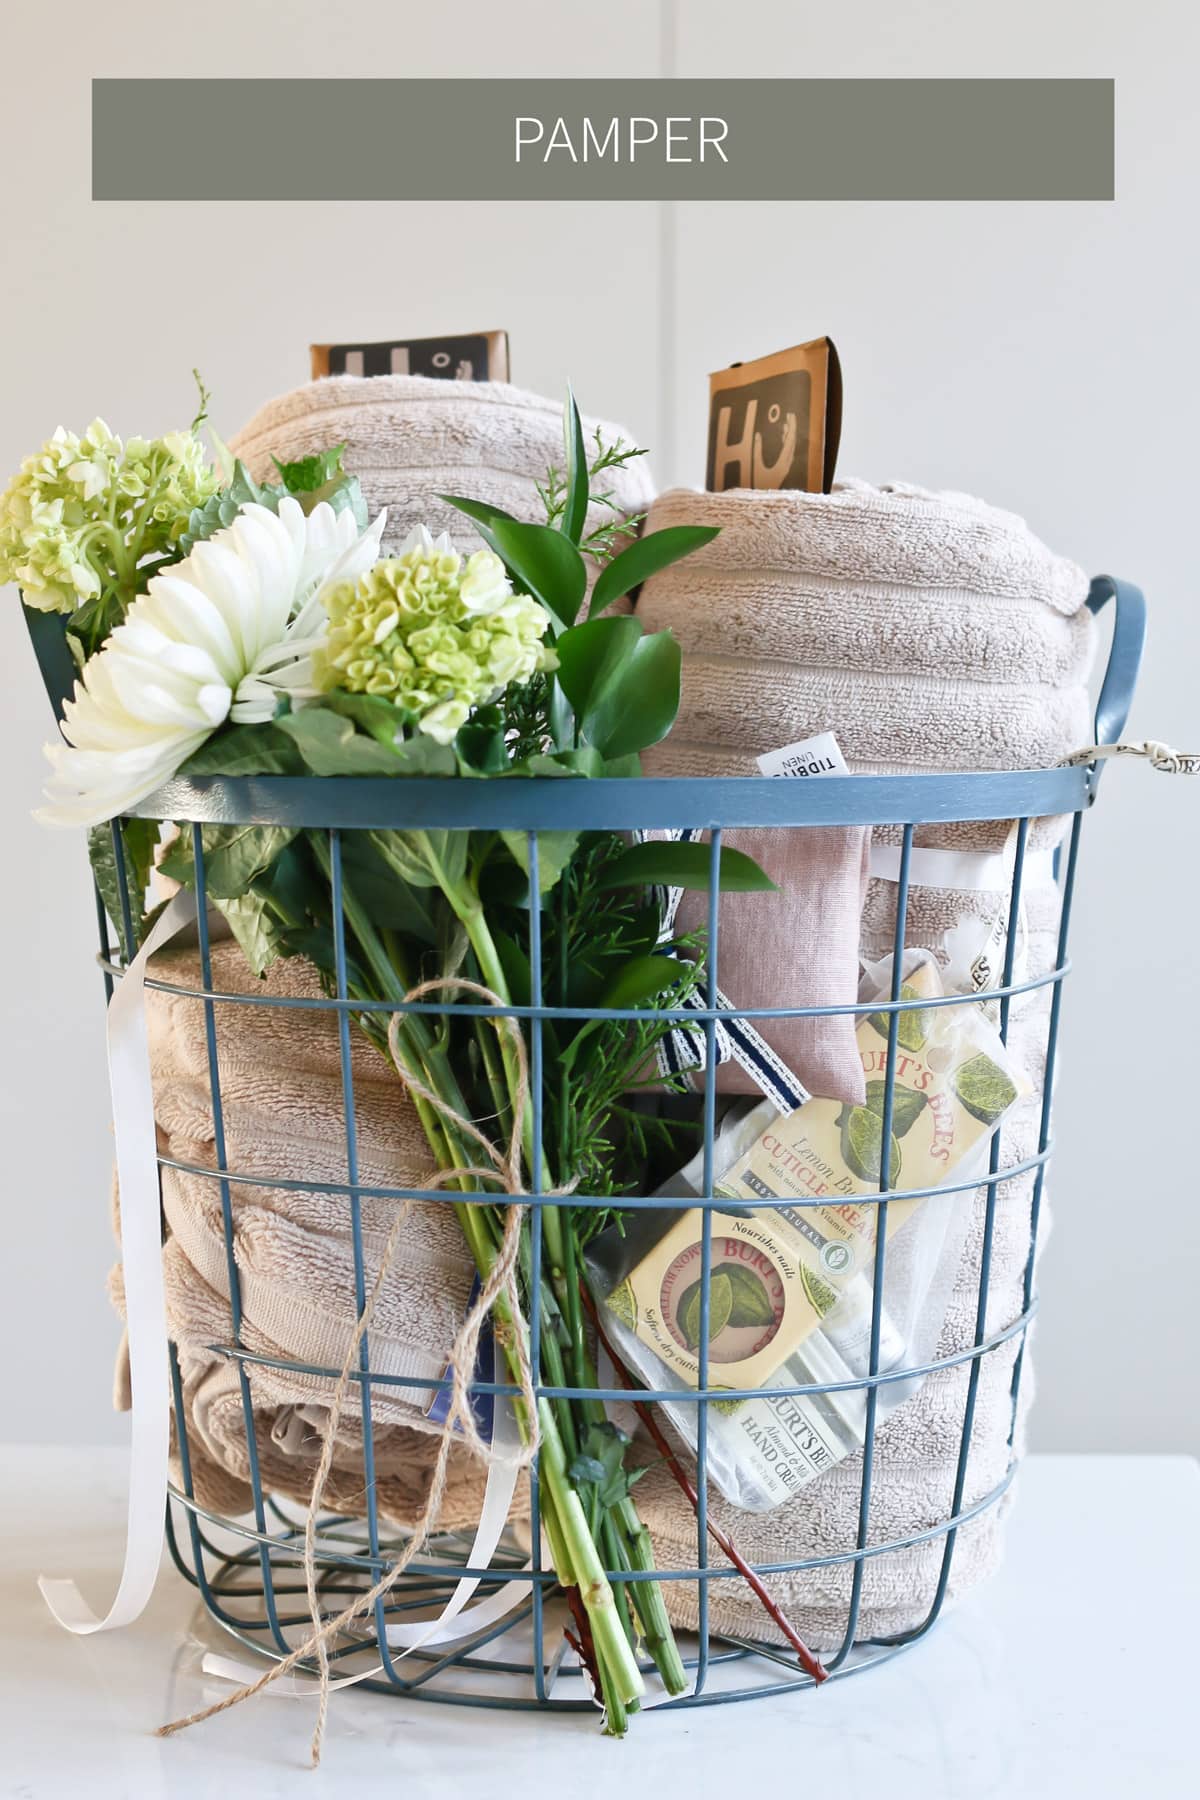 pamper gift basket idea for grandma that includes flowers, chocolate, towels, and skincare products